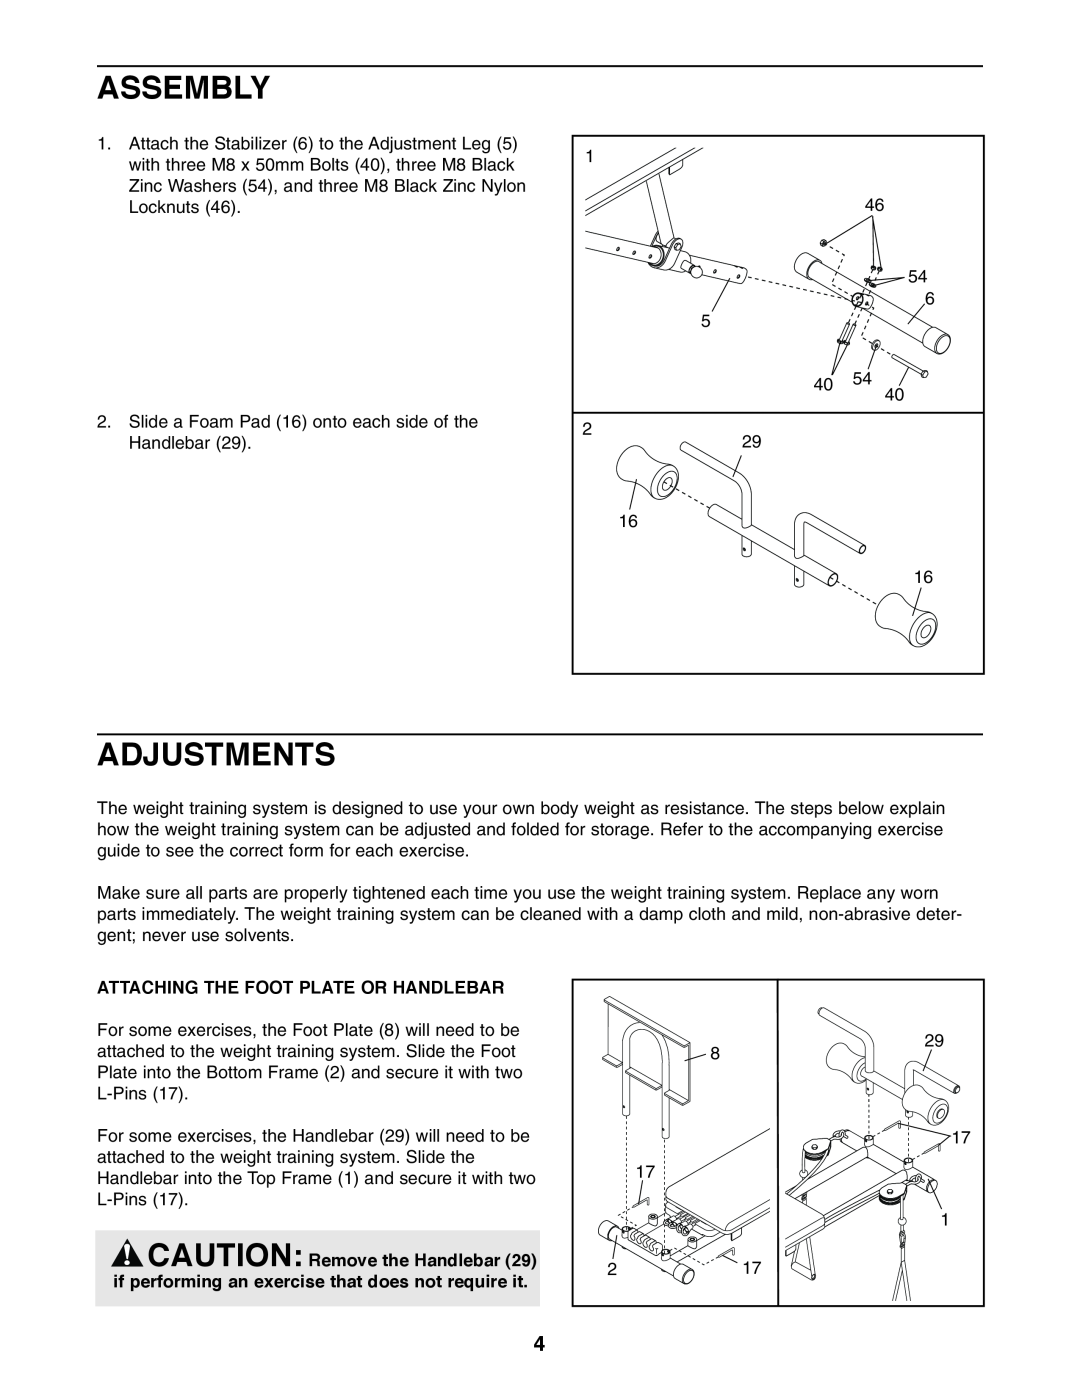 Weider 5000 user manual Assembly, Adjustments, Attaching The Foot Plate Or Handlebar 